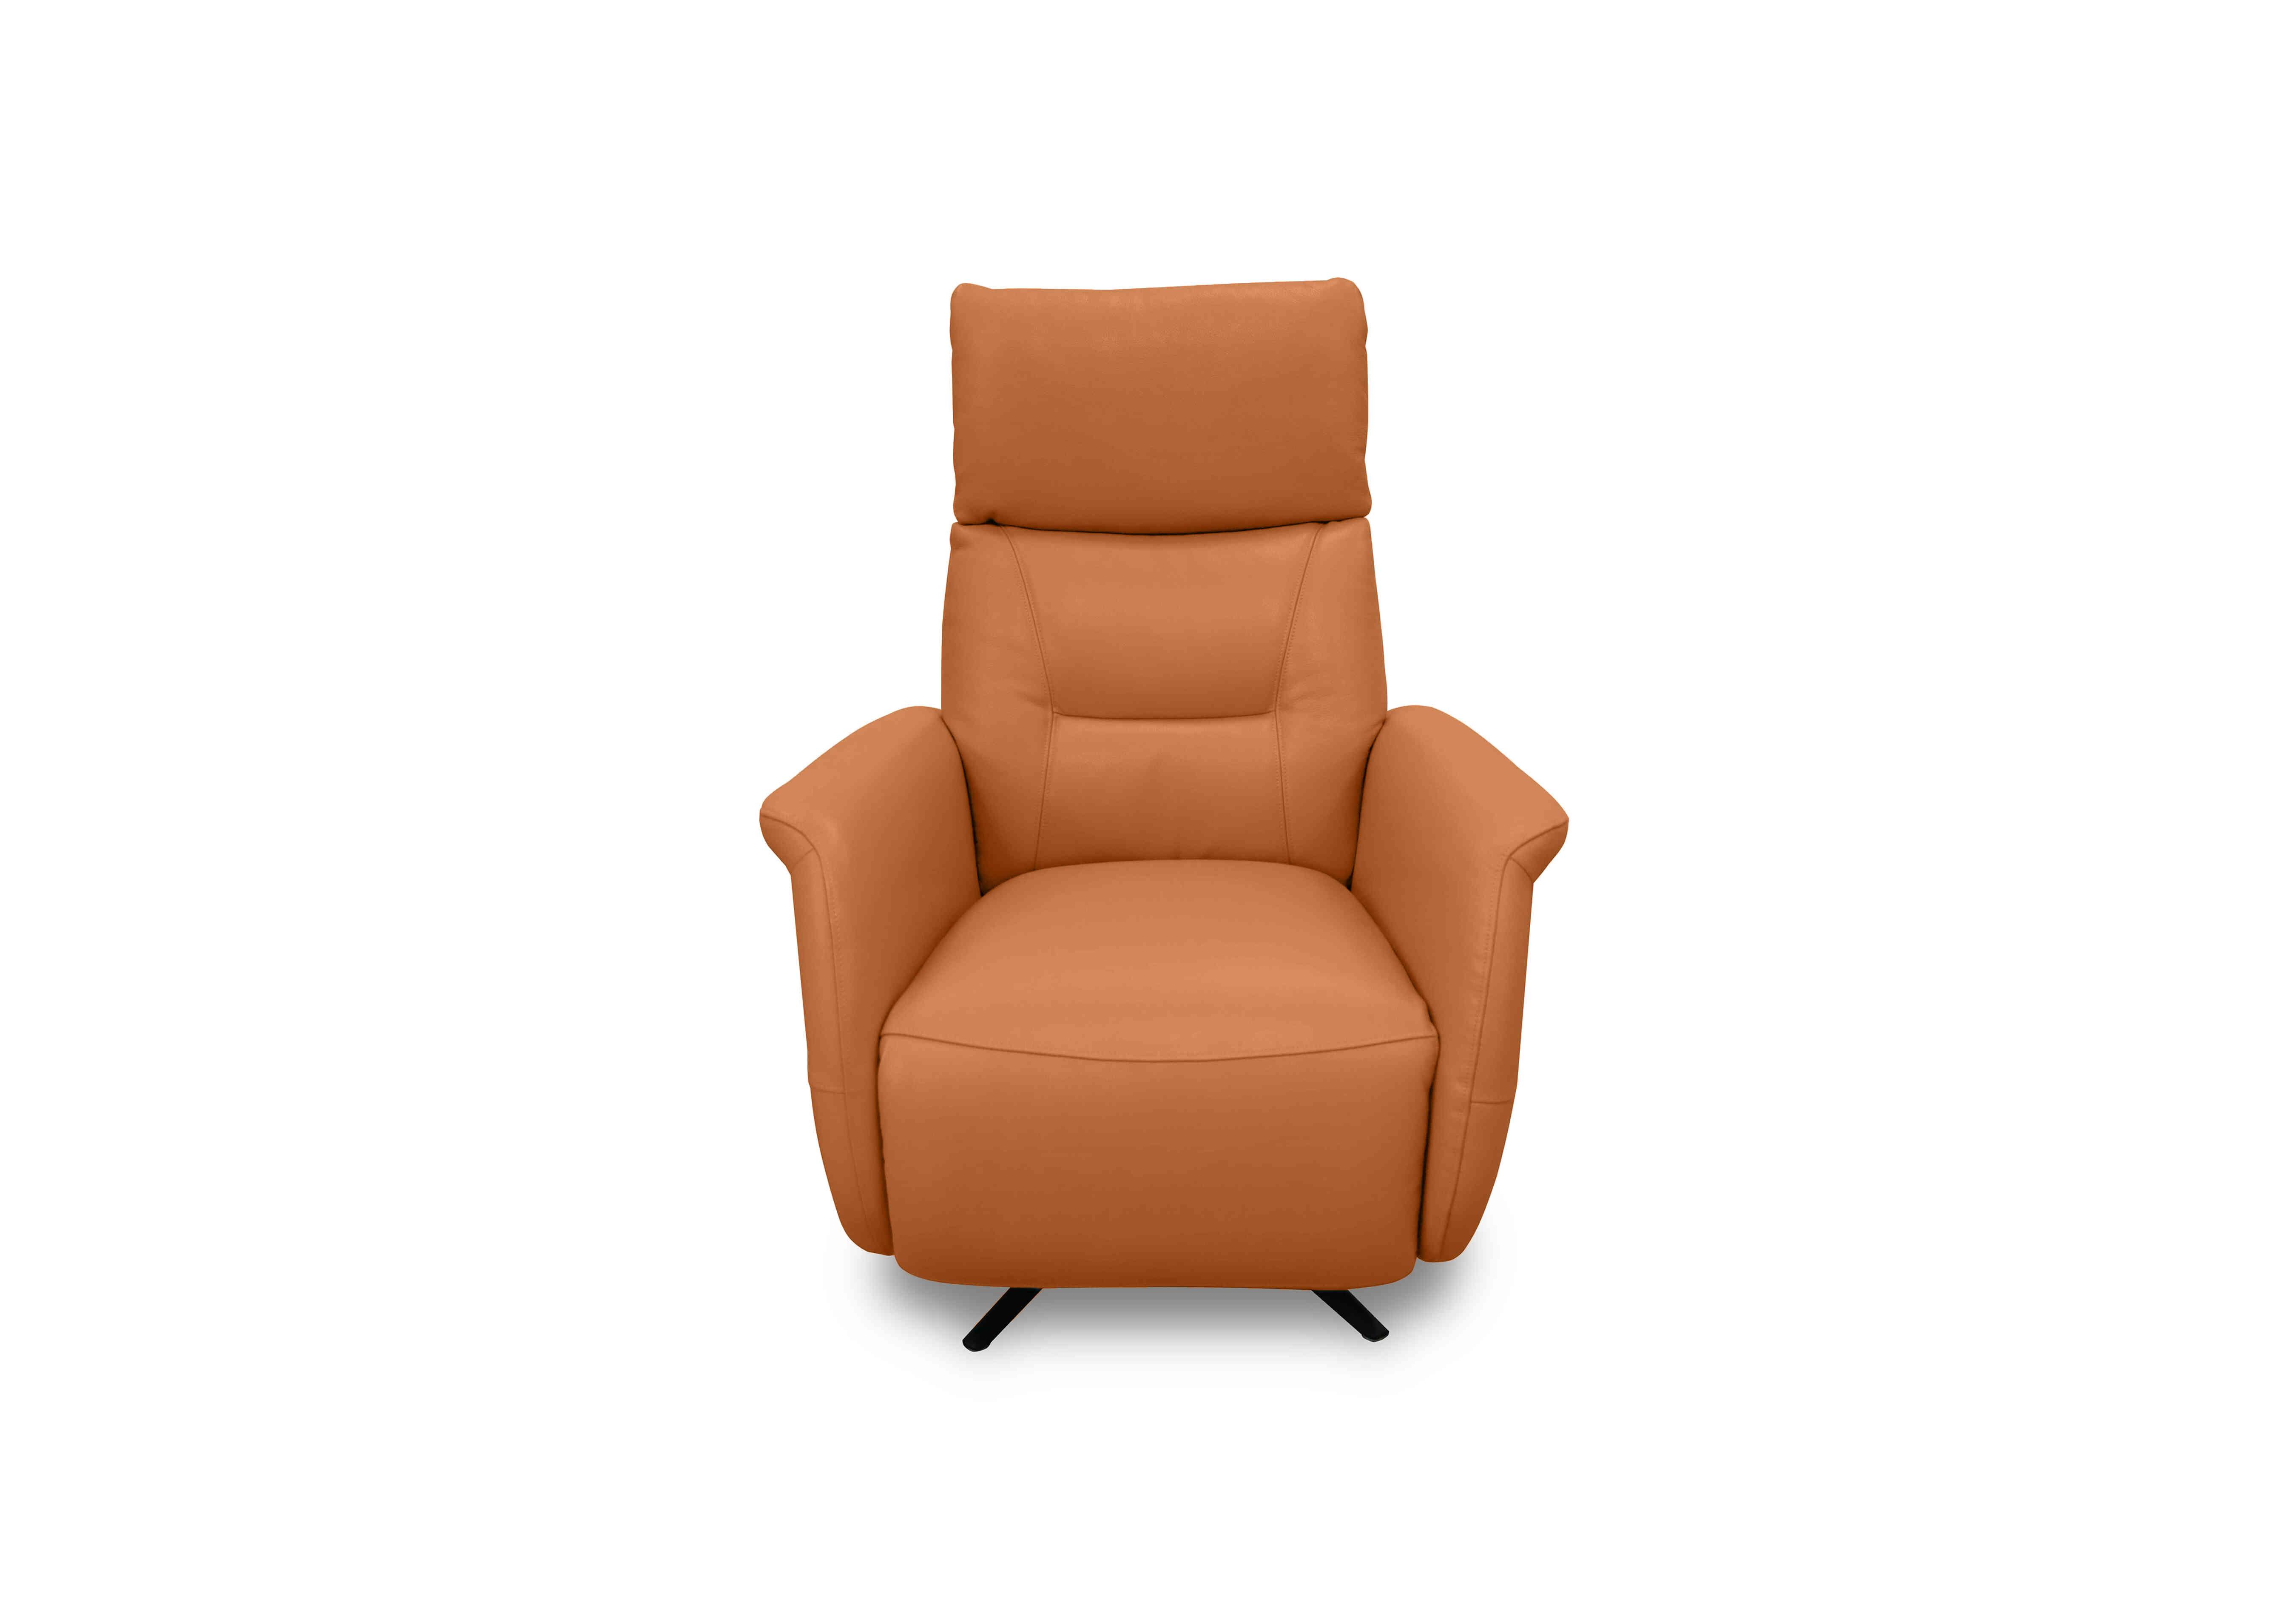 Designer Chair Collection Dusseldorf Leather Power Recliner Swivel Chair in Bv-335e Honey Yellow on Furniture Village